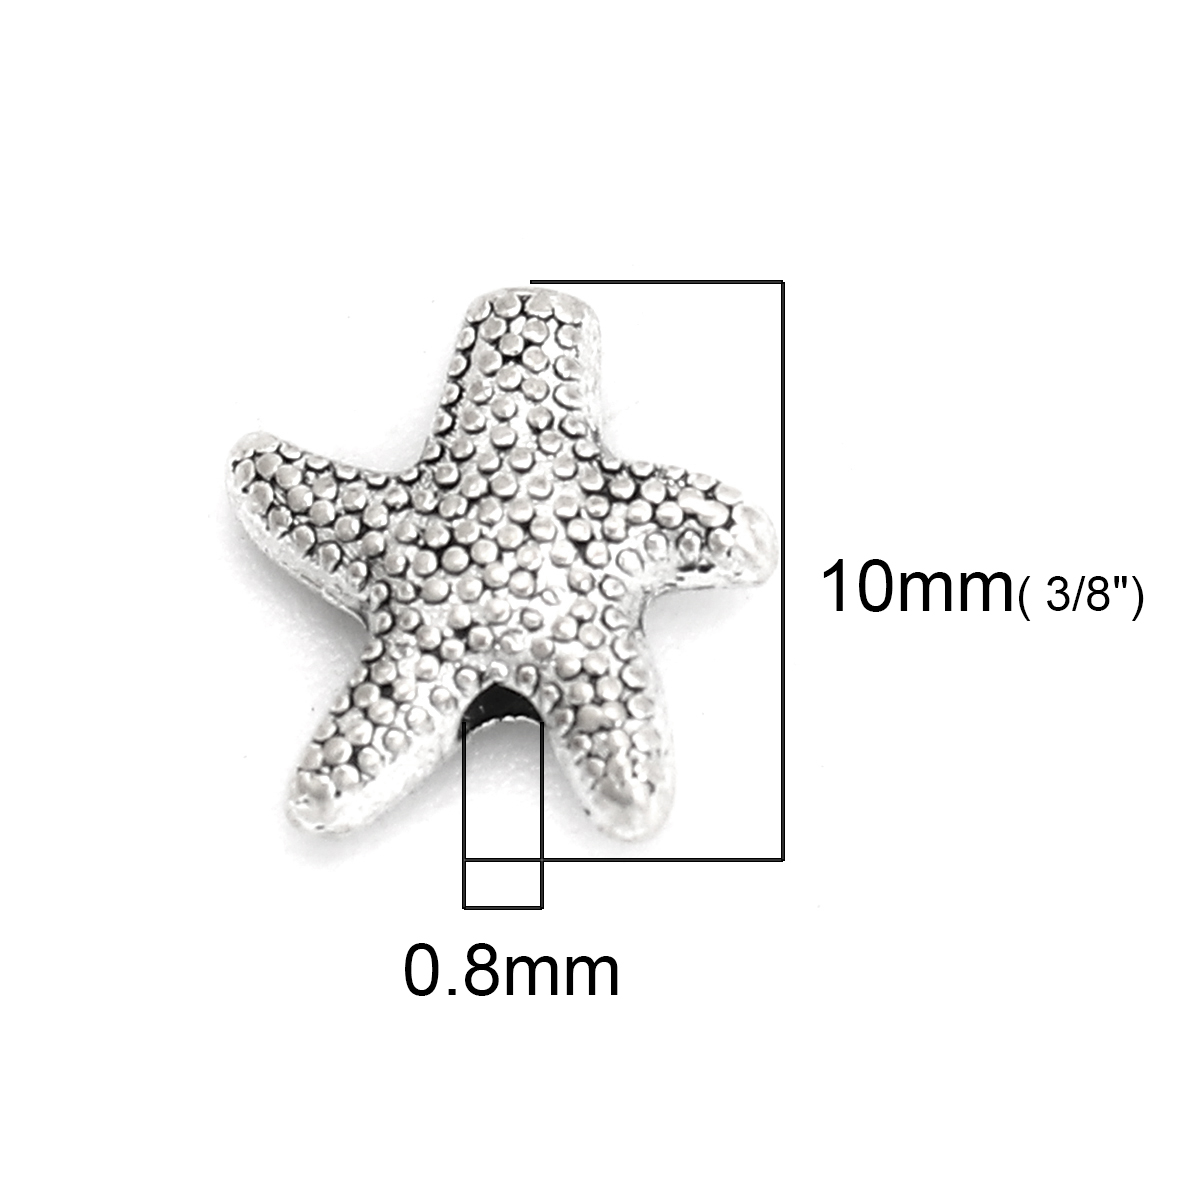 Picture of Zinc Based Alloy Ocean Jewelry Spacer Beads Star Fish Antique Silver 10mm x 10mm, Hole: Approx 0.8mm, 50 PCs